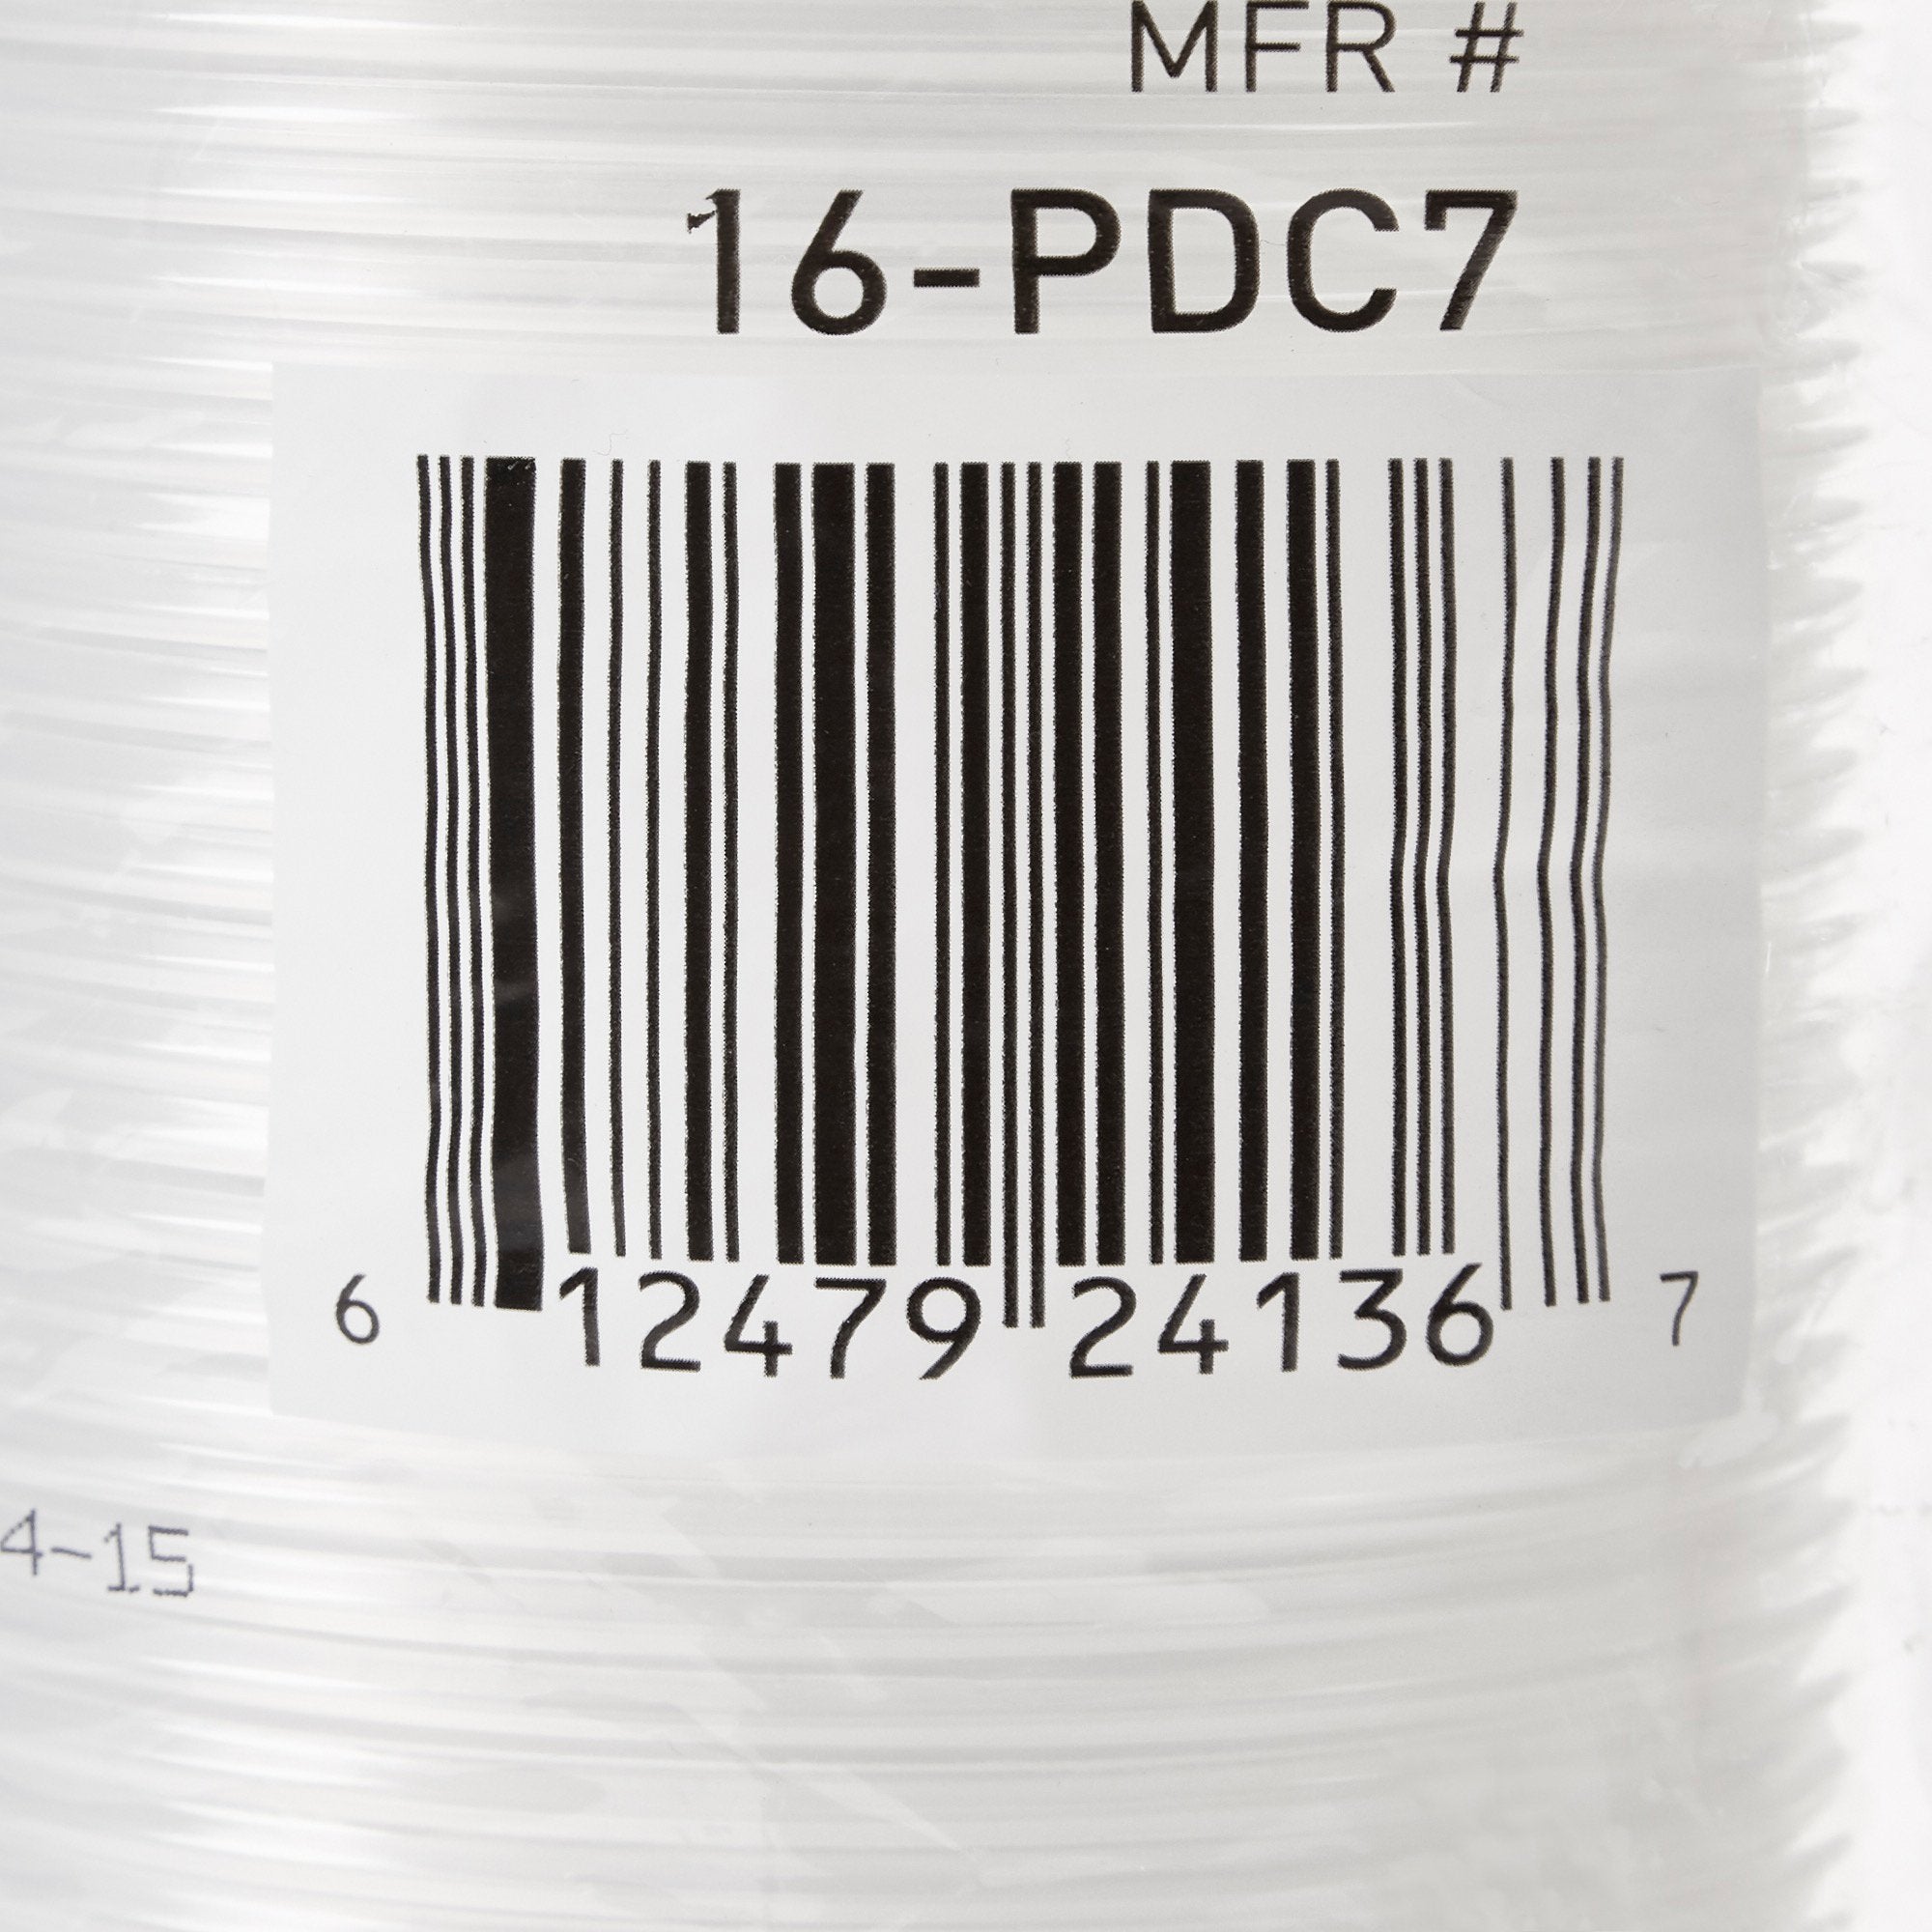 McKesson Clear Polypropylene Drinking Cups, 7 oz. - Bulk Pack of 2000